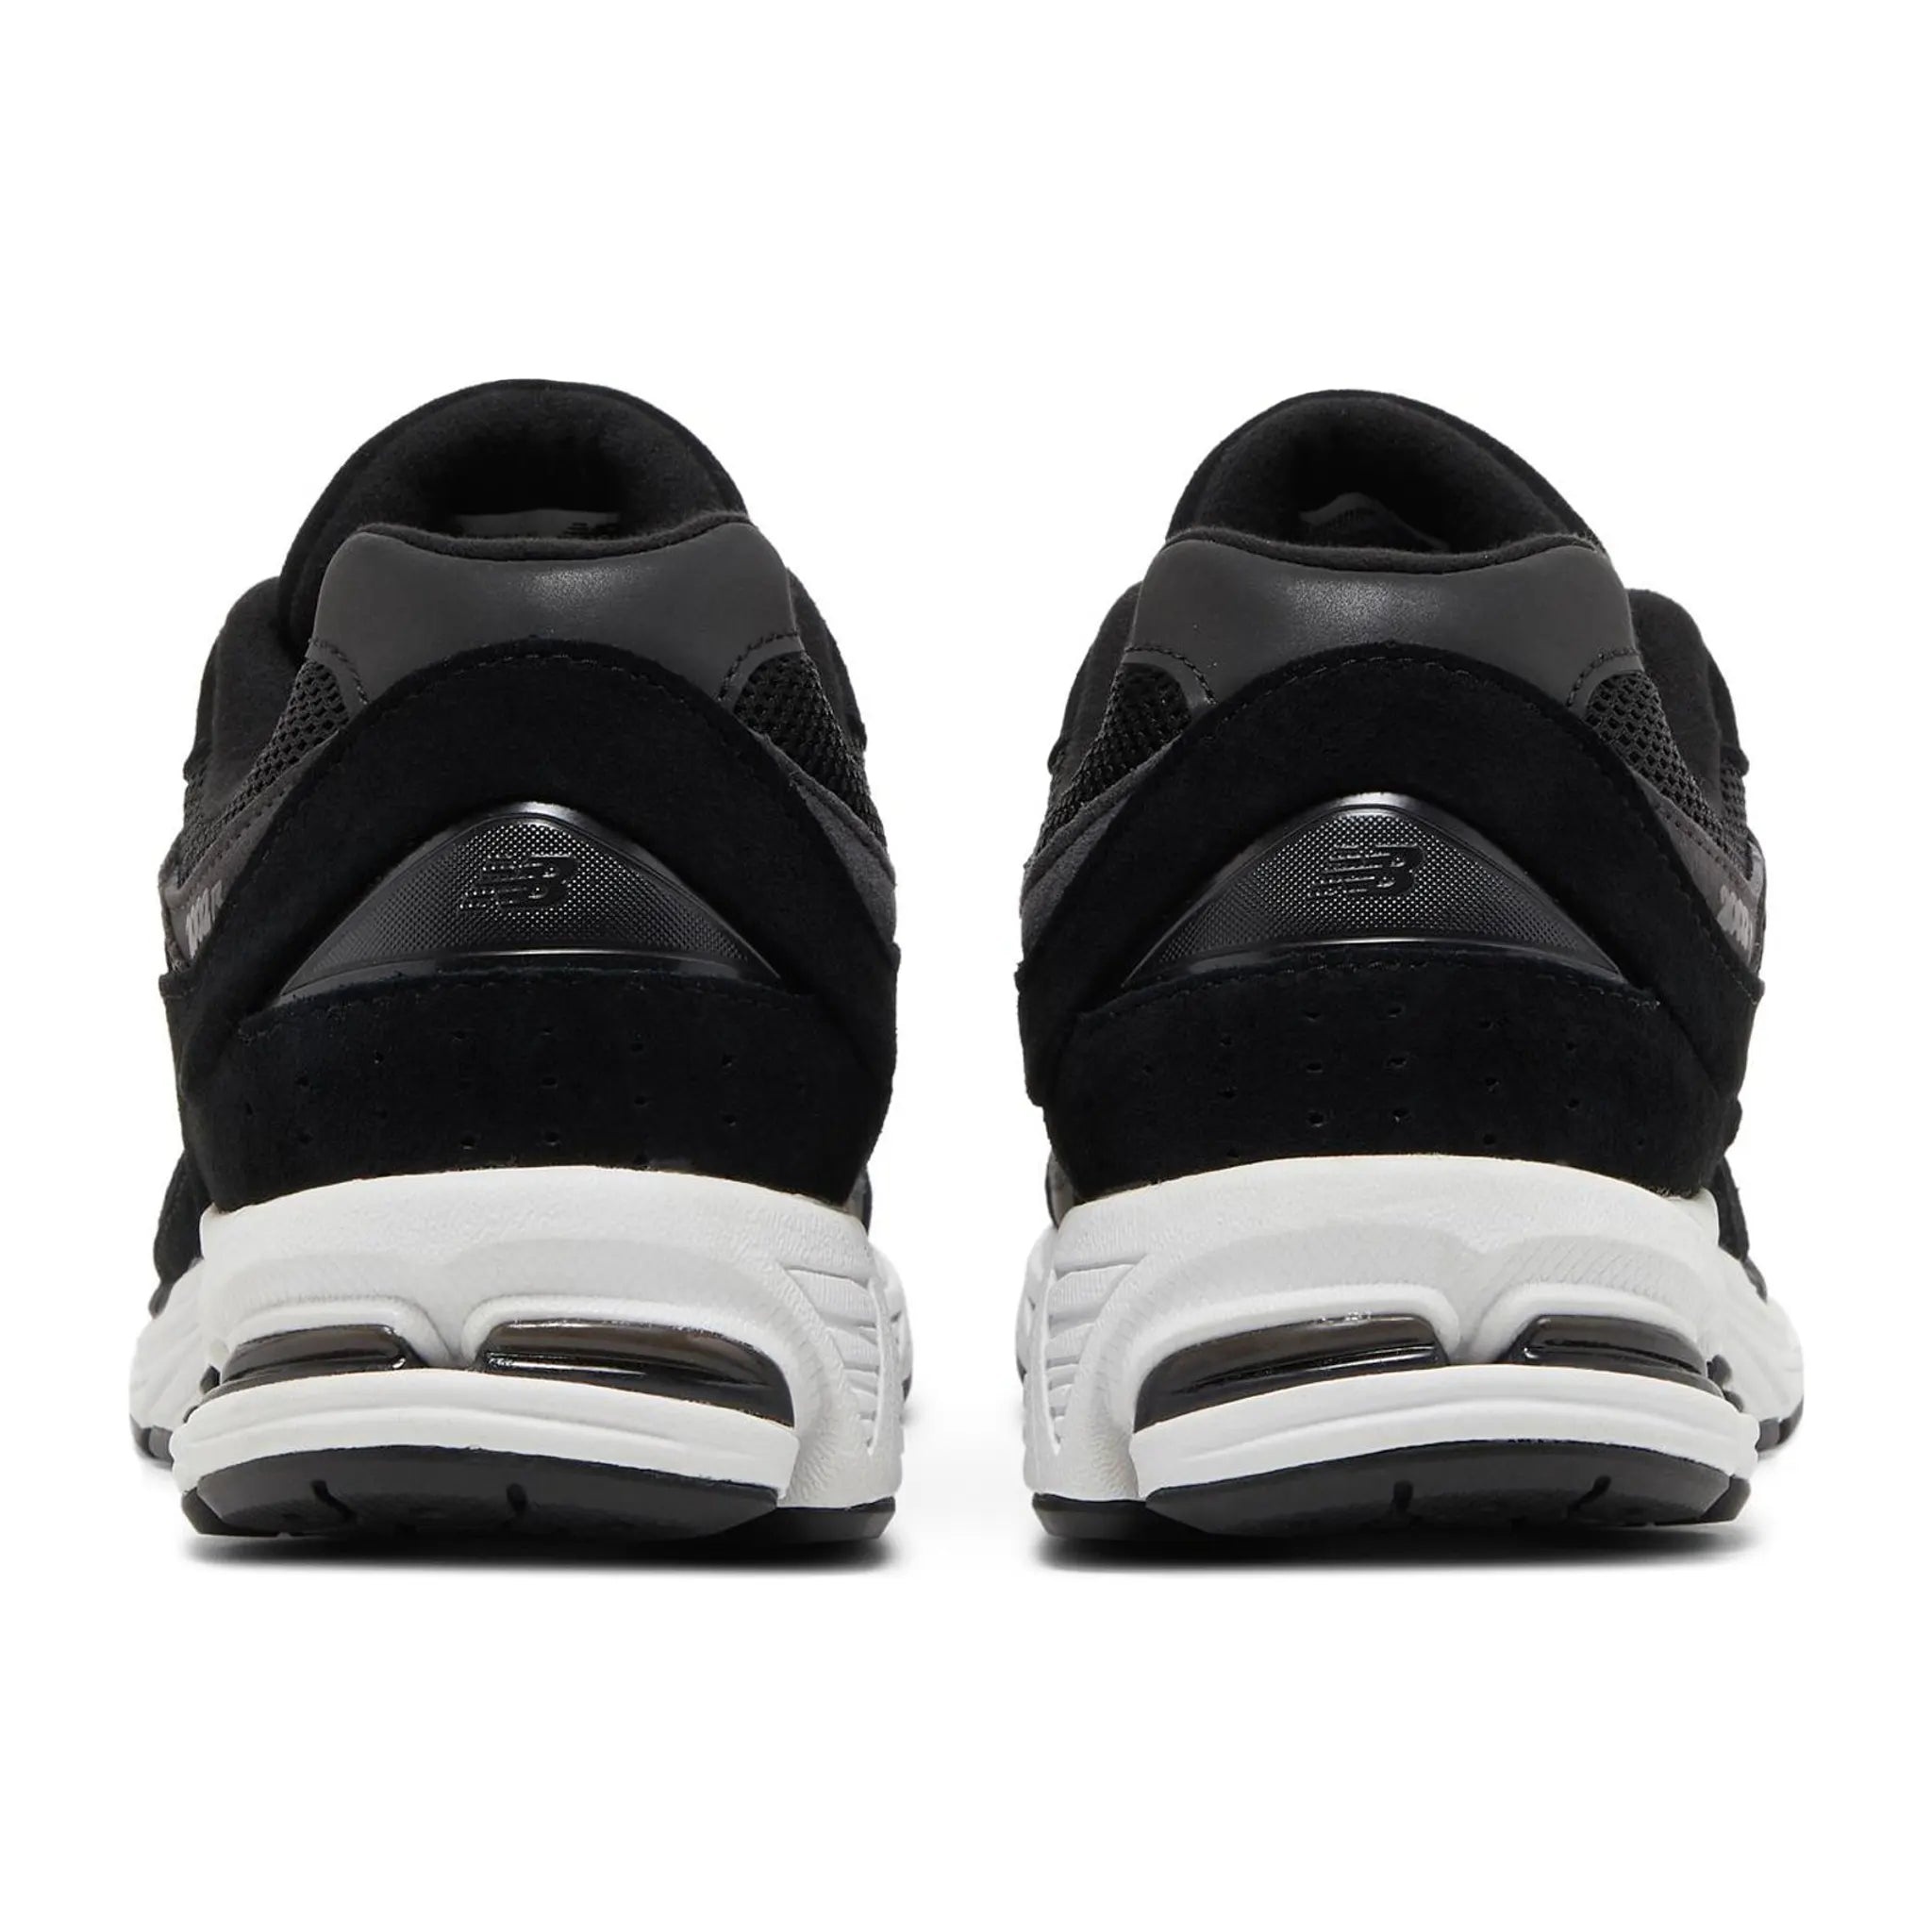 Back view of New Balance 2002R Black Sneakers M2002RBK